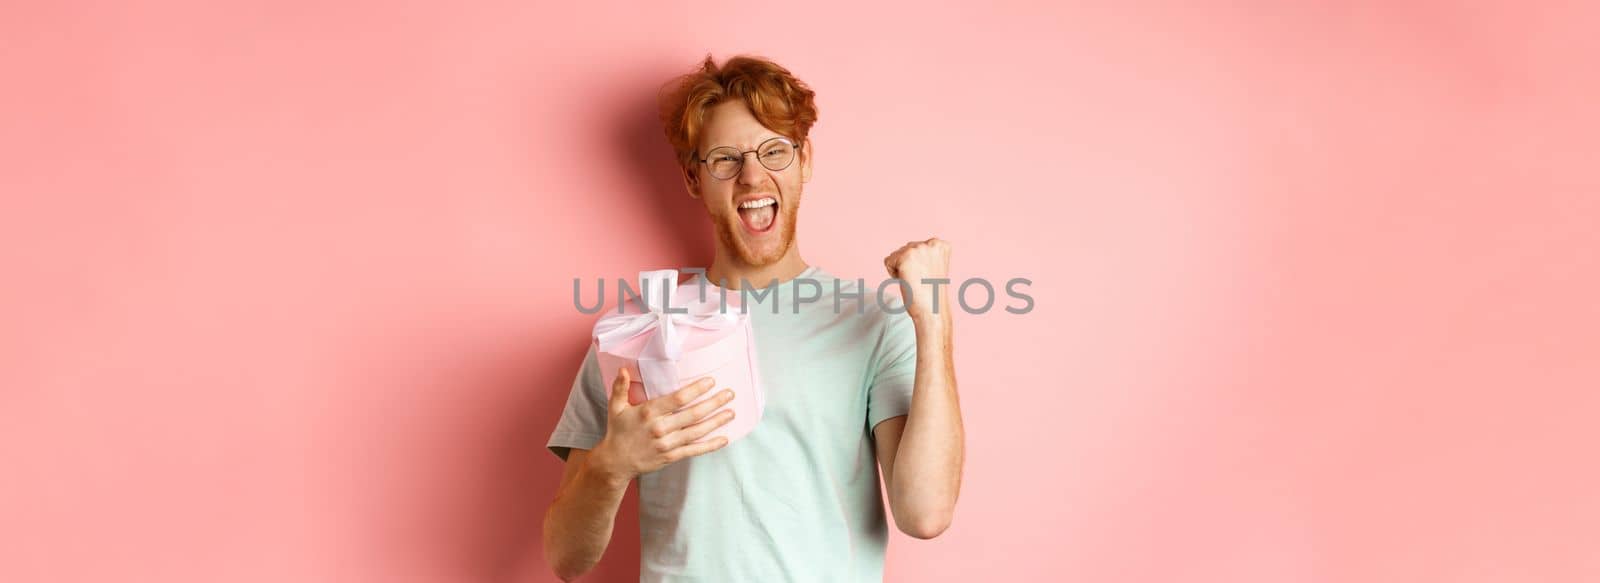 Valentines day and romance concept. Cheerful redhead guy making fist pump and scream yes with joy, holding gift box, smiling, standing over pink background.